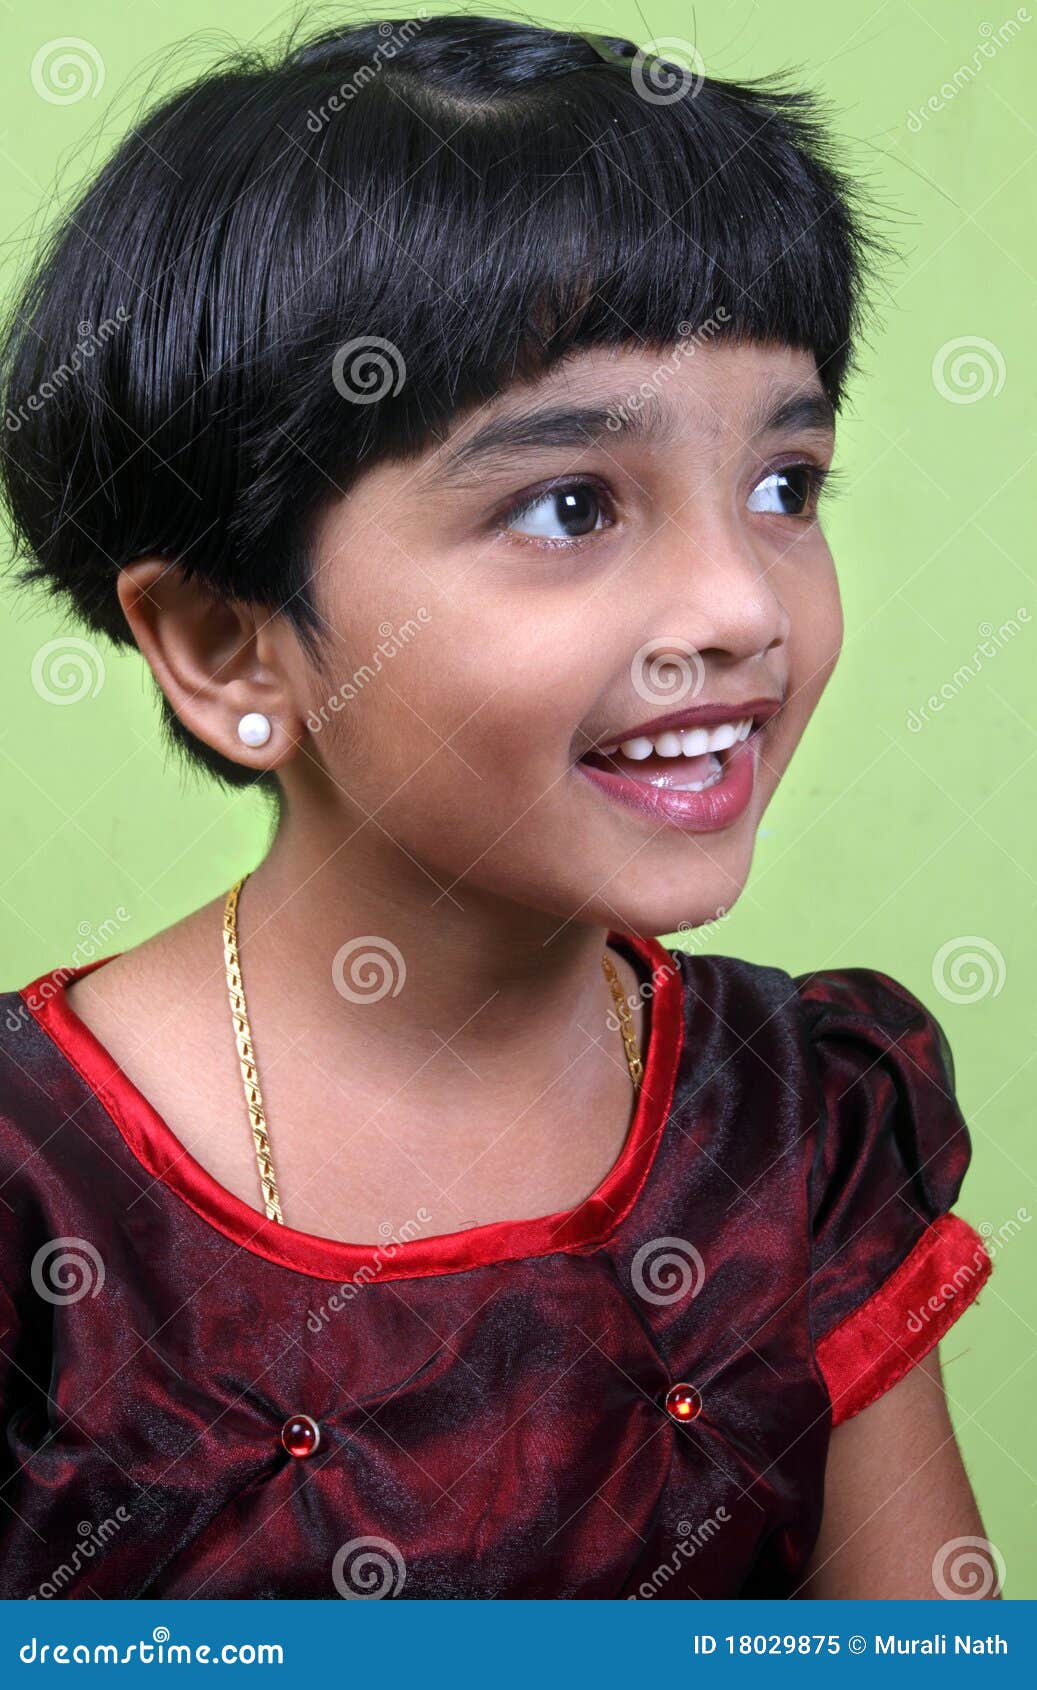 Indian girl I had the privilege of photographing years ago. : r/aww